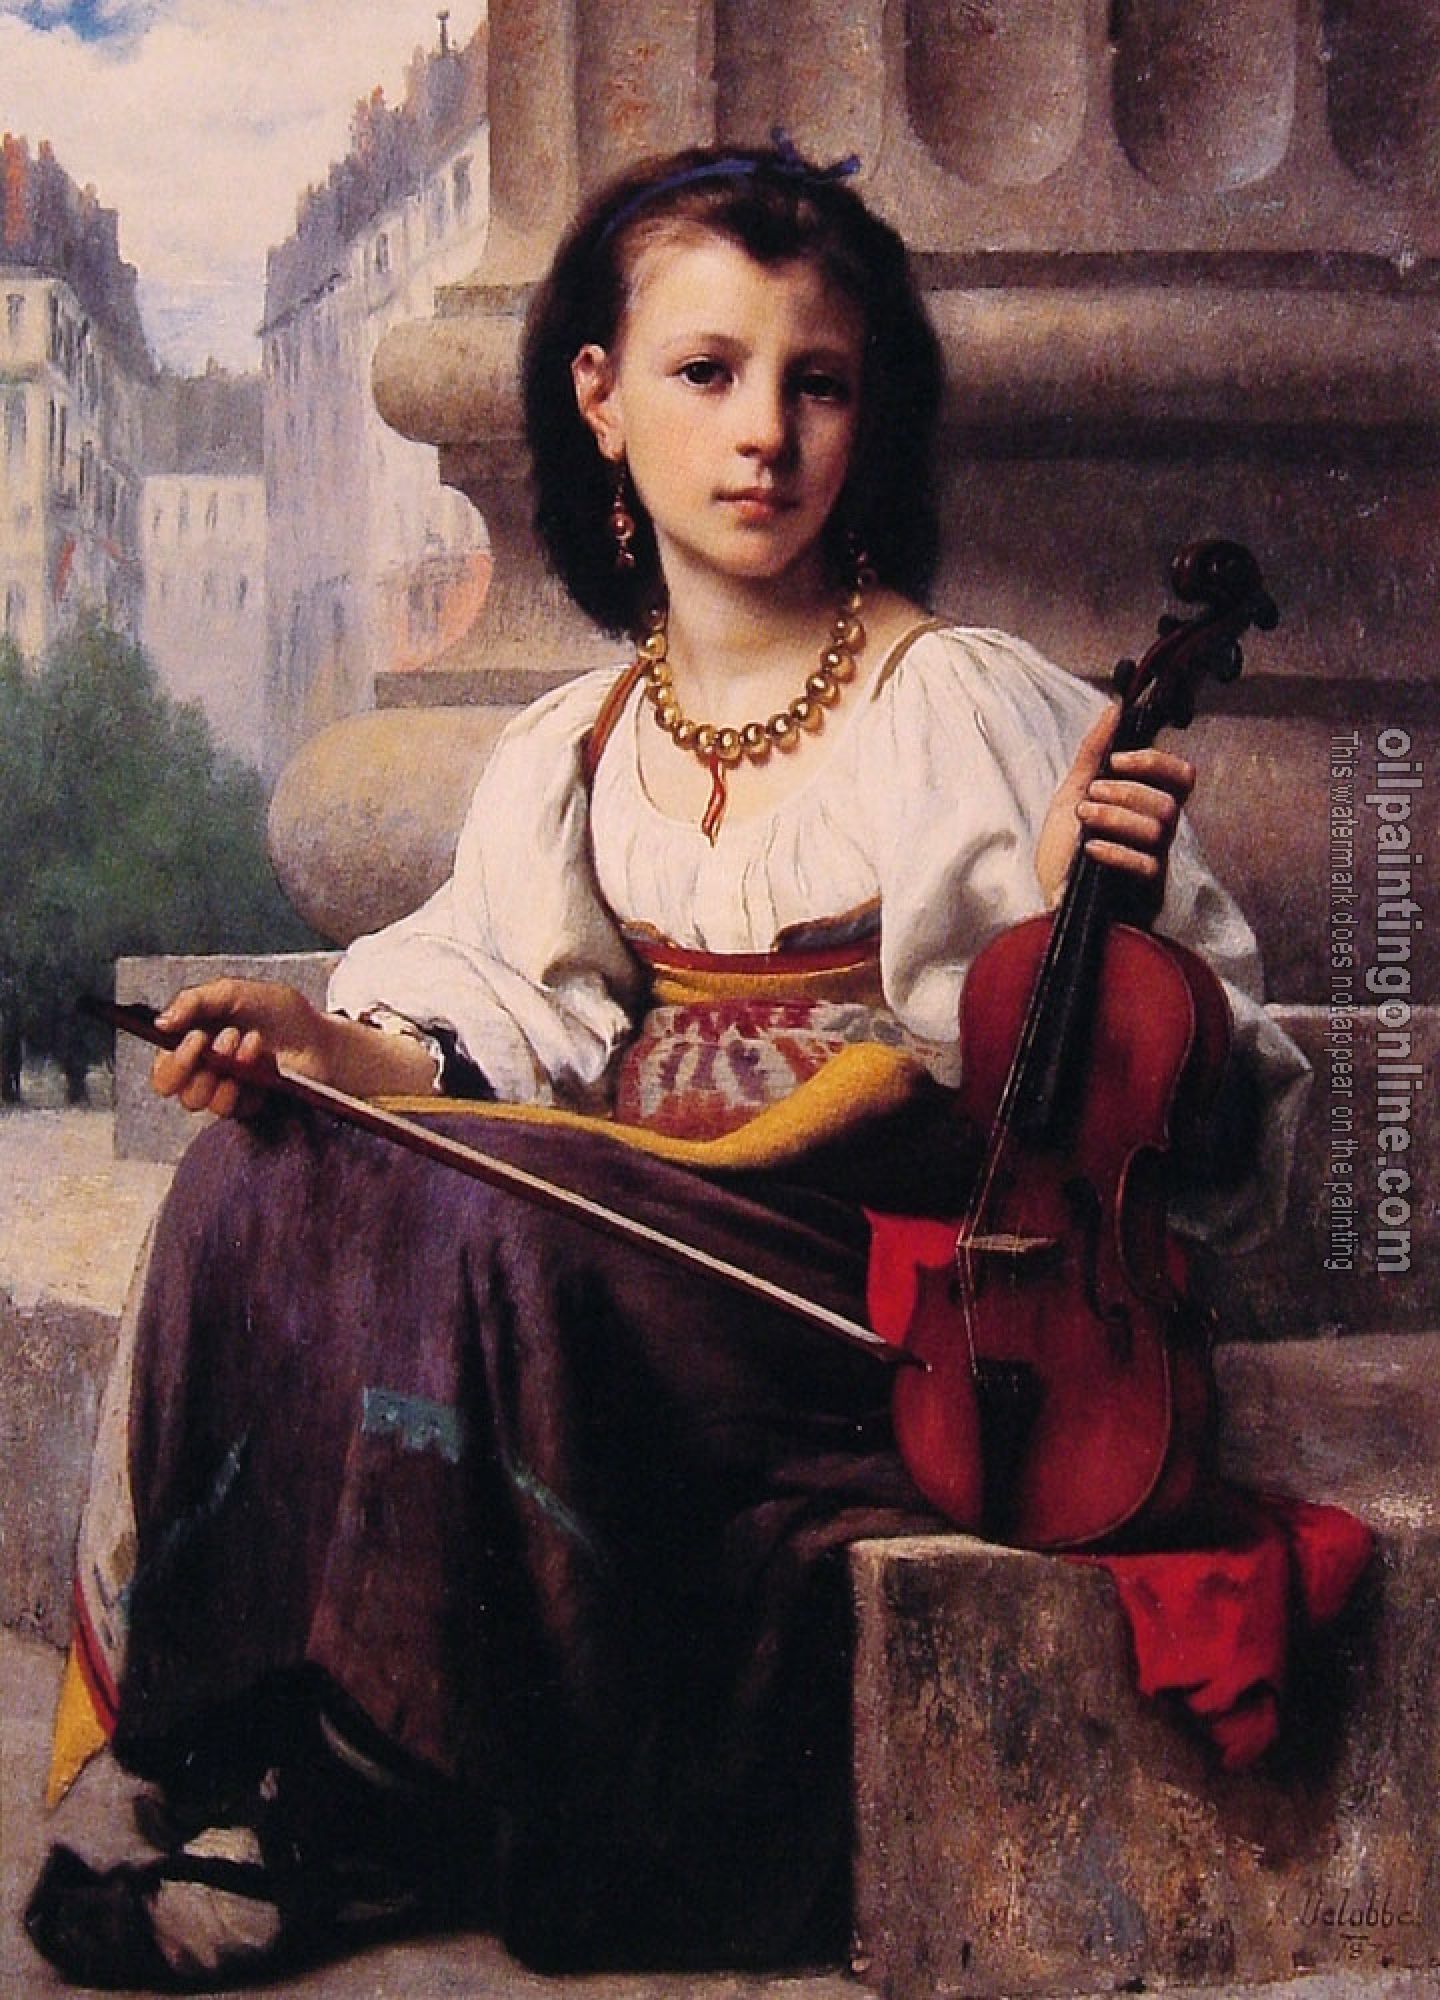 Delobbe, Francois Alfred - The Young Musician